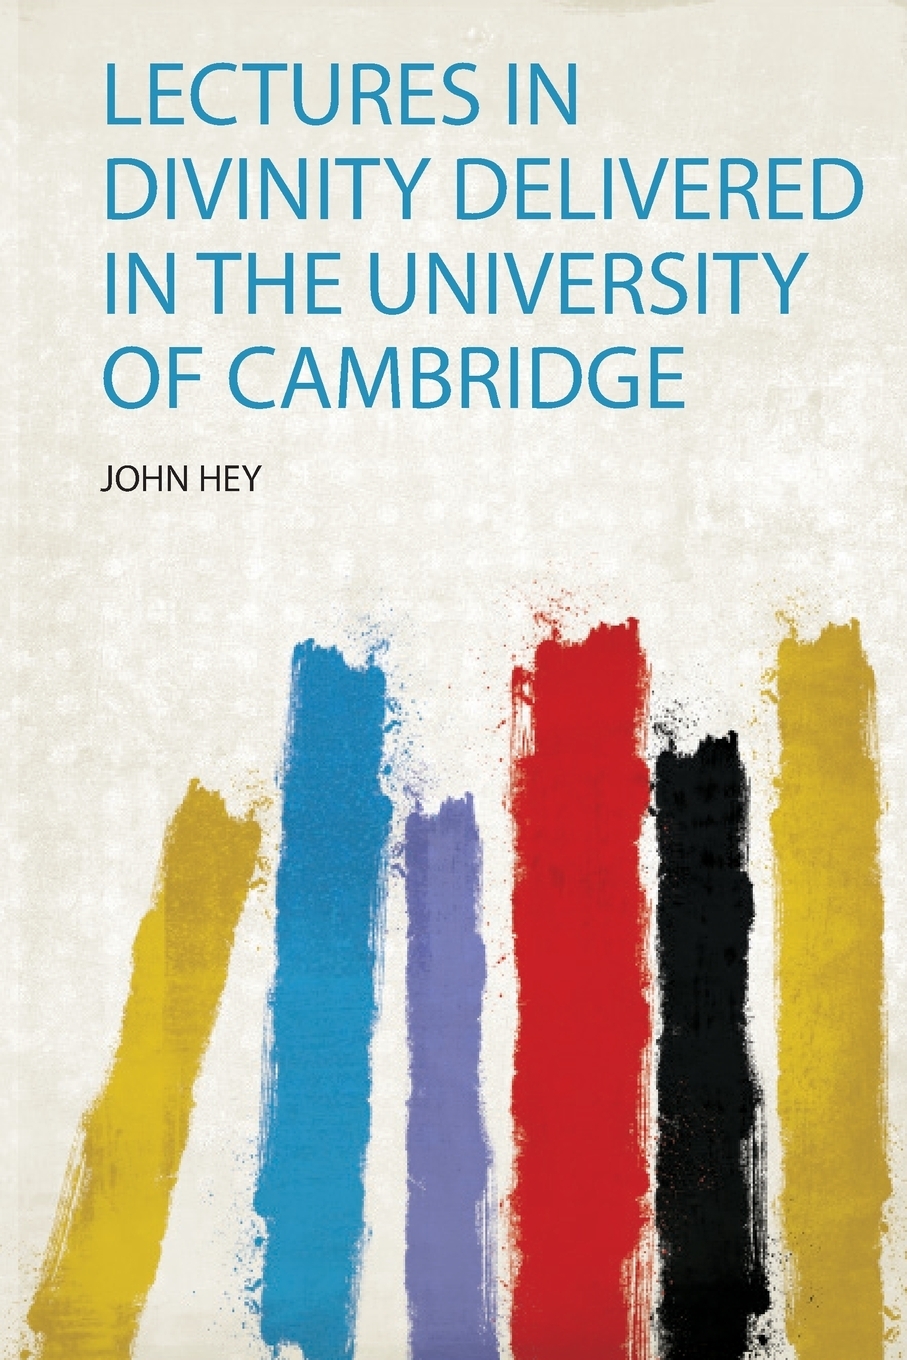 Lectures in Divinity Delivered in the University of Cambridge